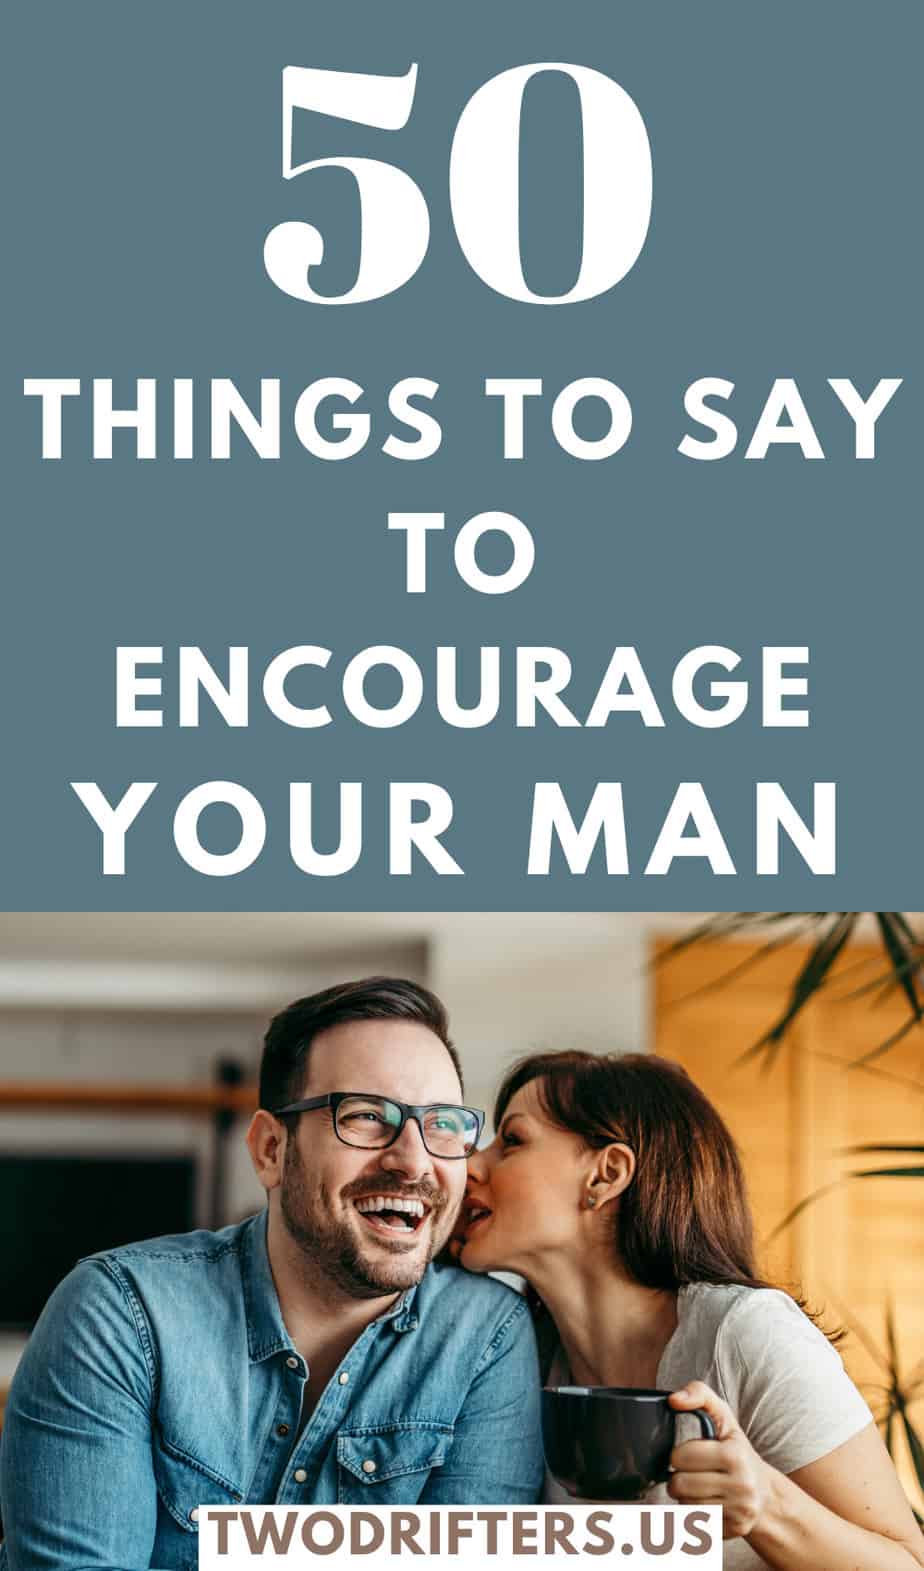 Pinterest social image that says "50 Things to Say to Encourage Your Man."